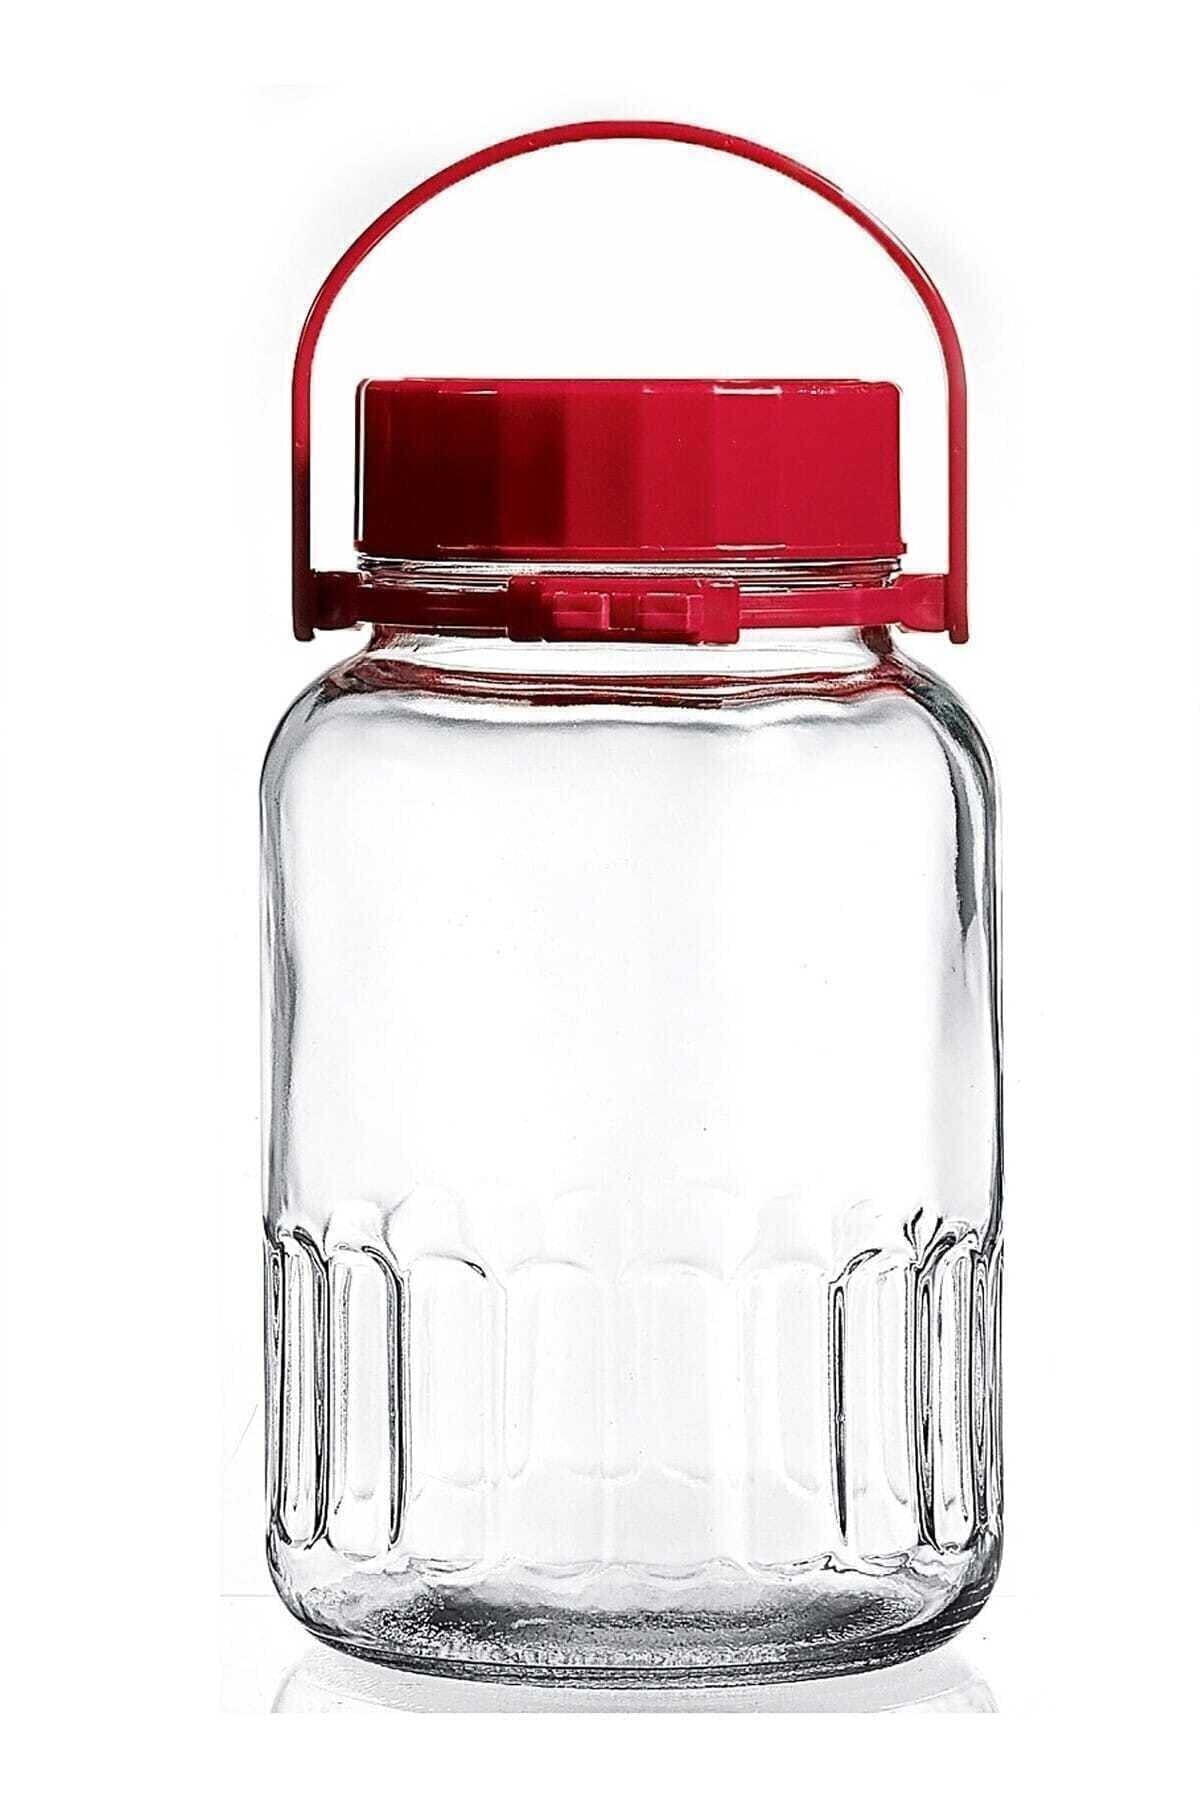 Jar with Colored Lid 4L